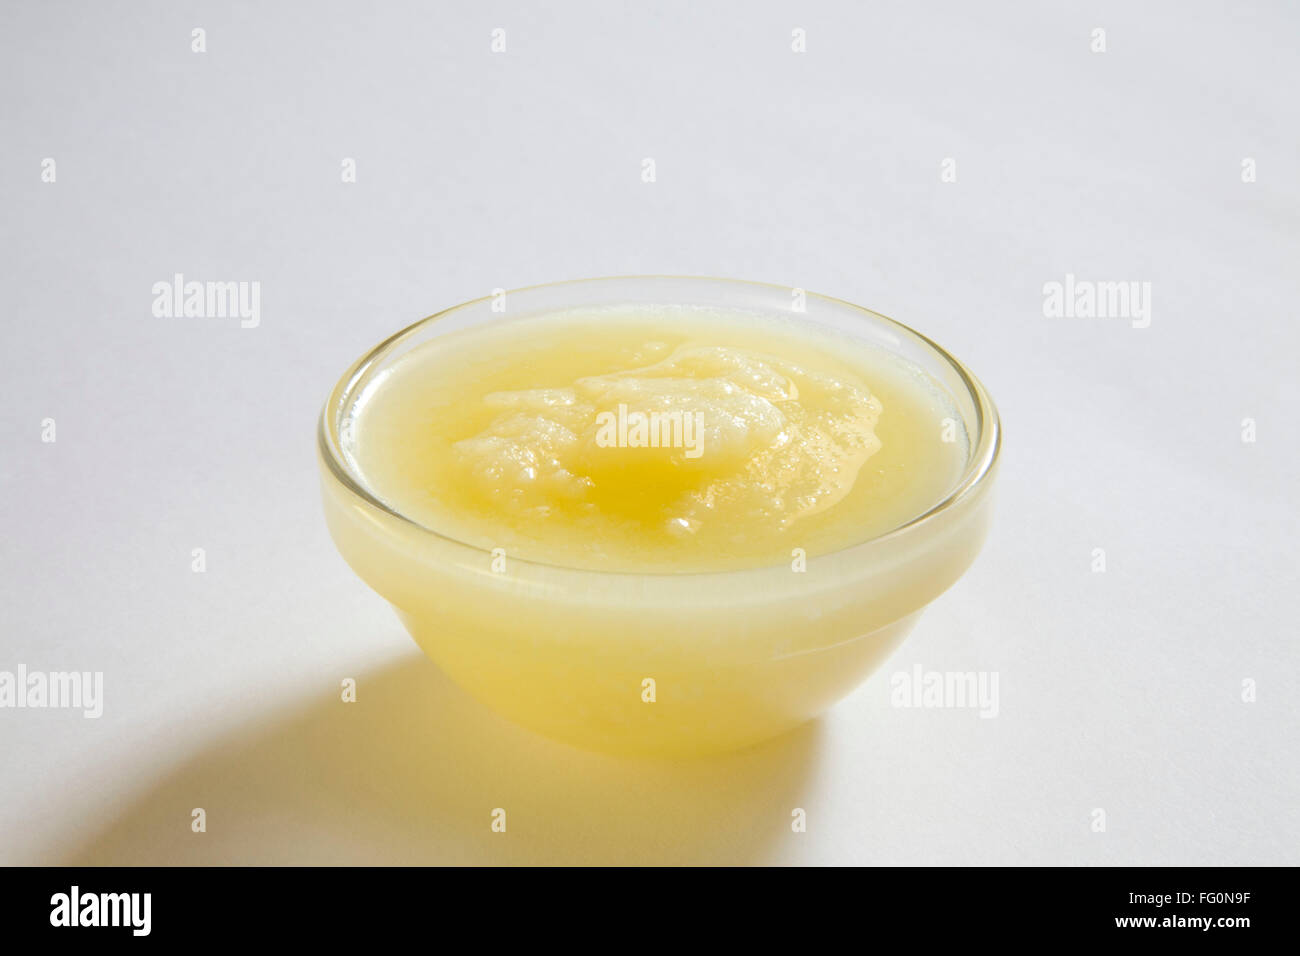 Homemade ghee or dairy product in bowl Stock Photo